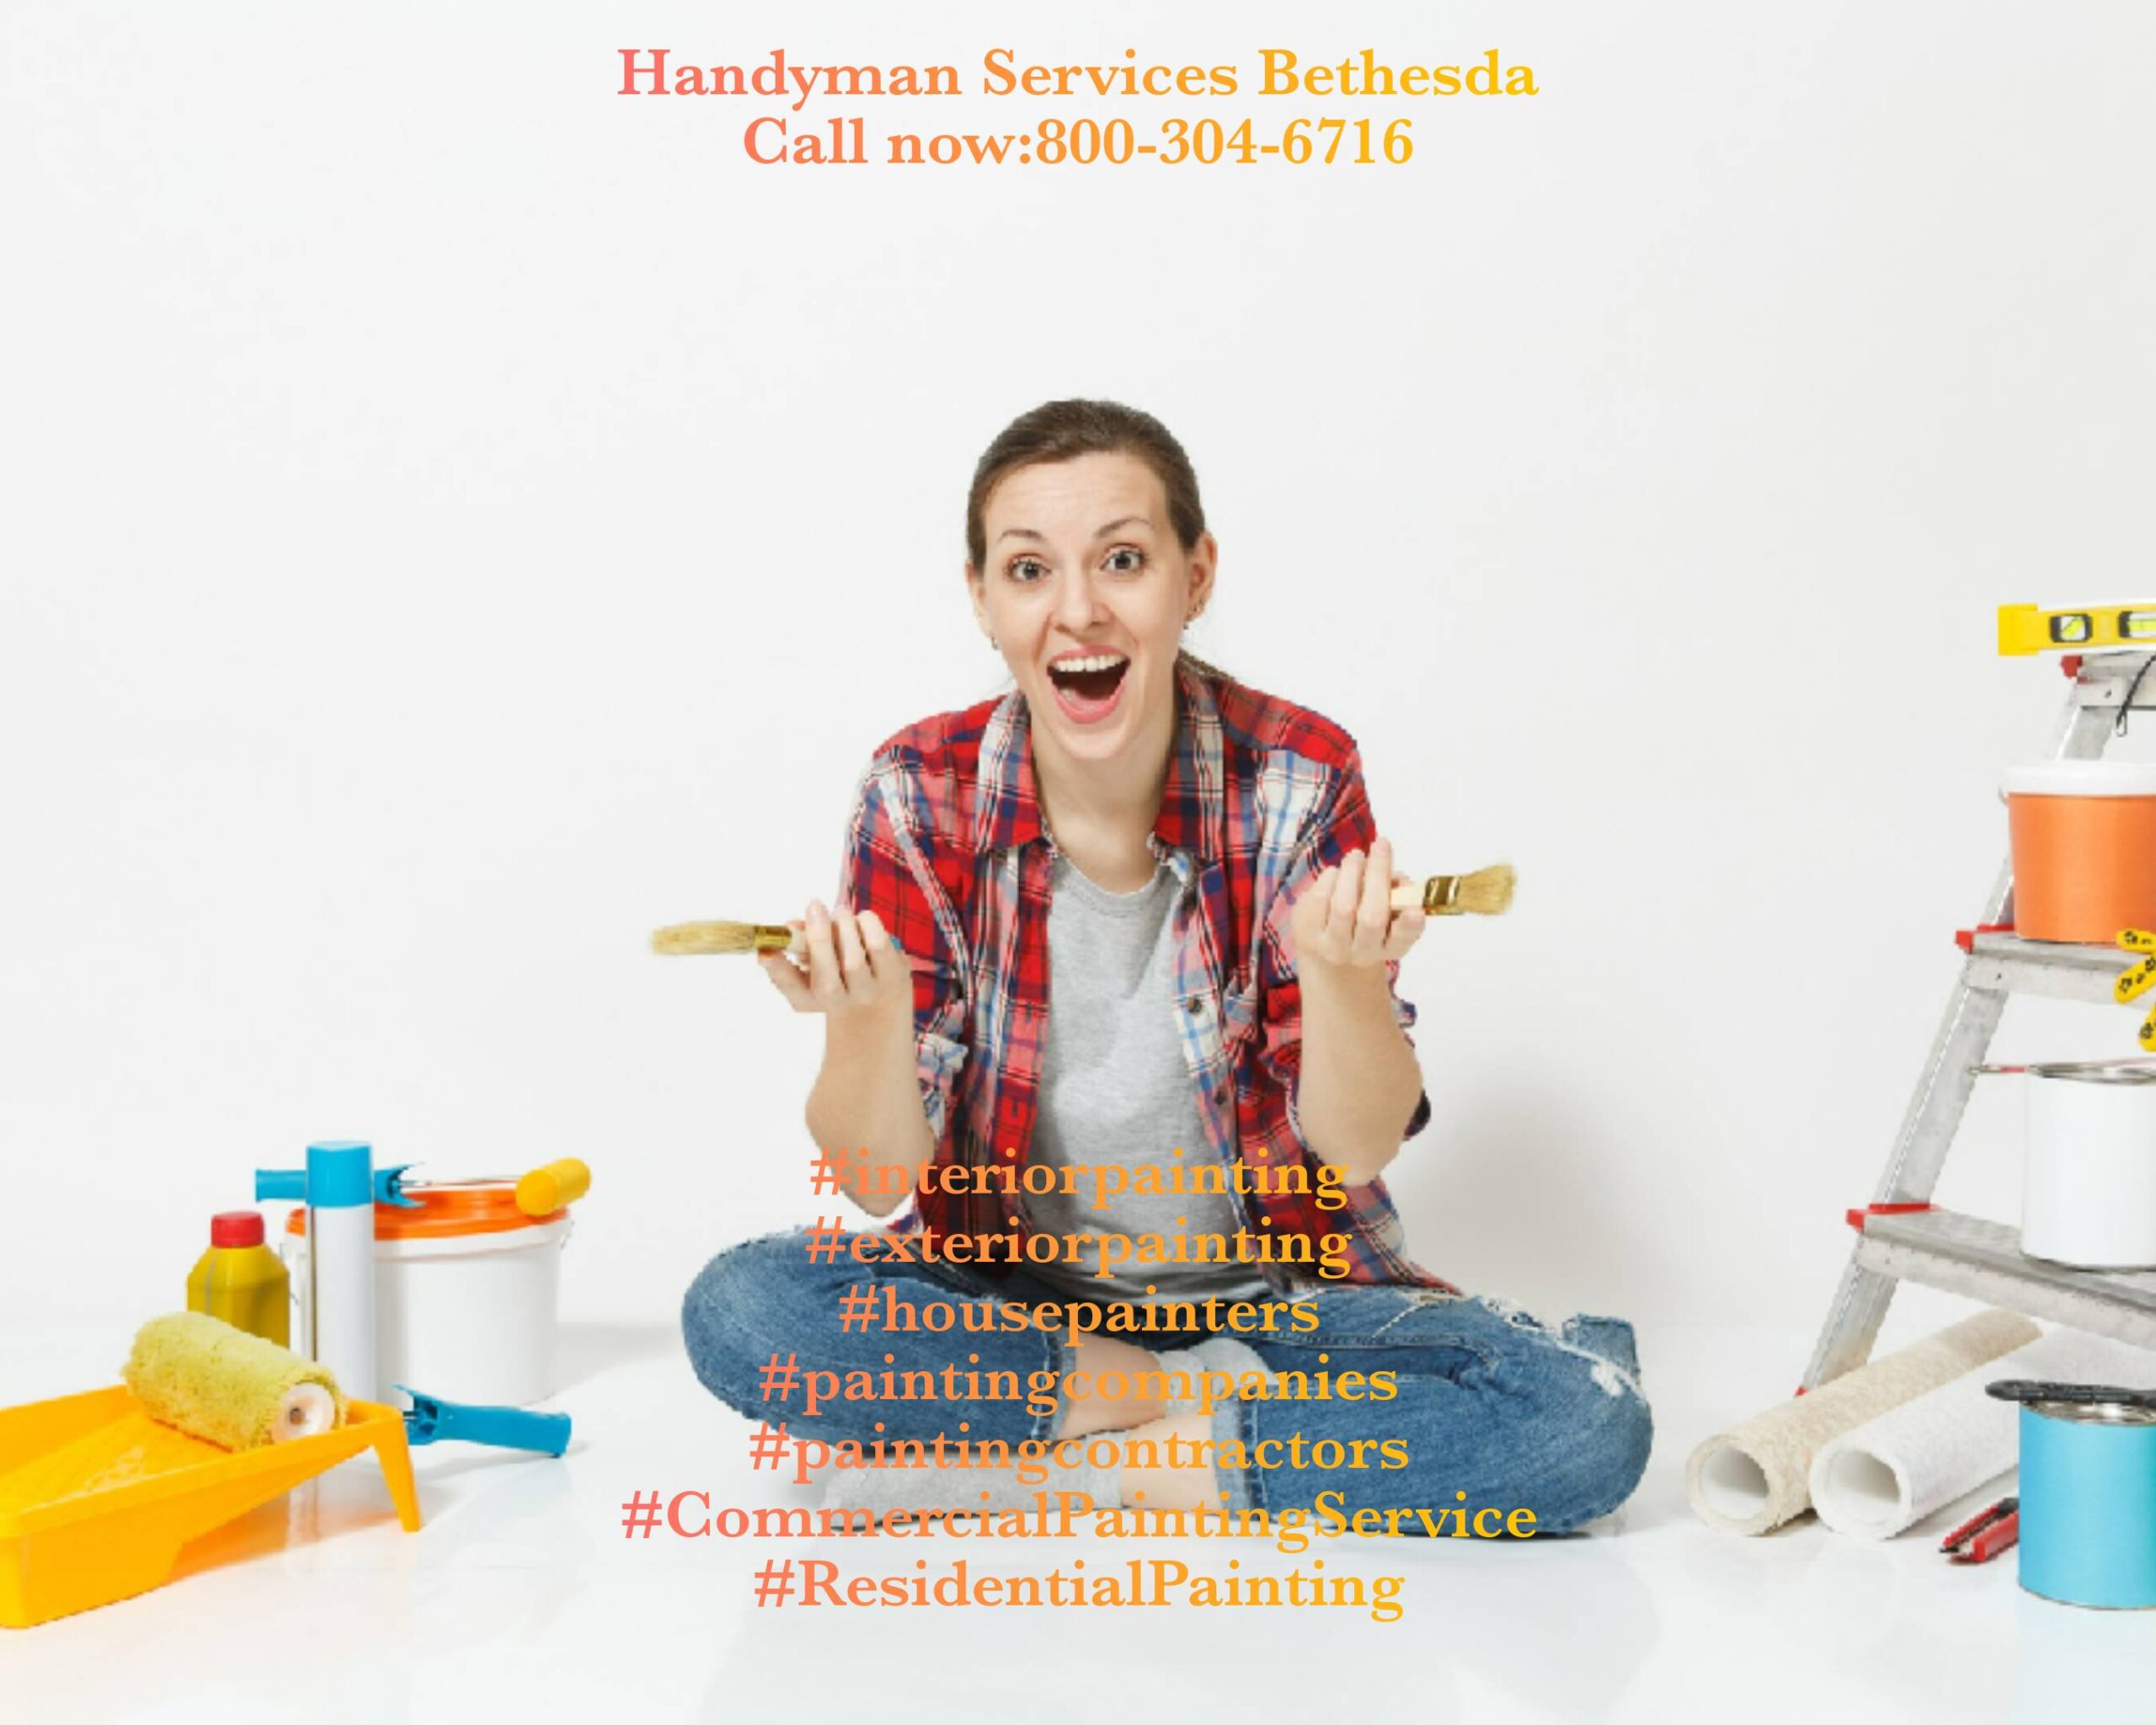 High-Quality Painting Services for Your Home